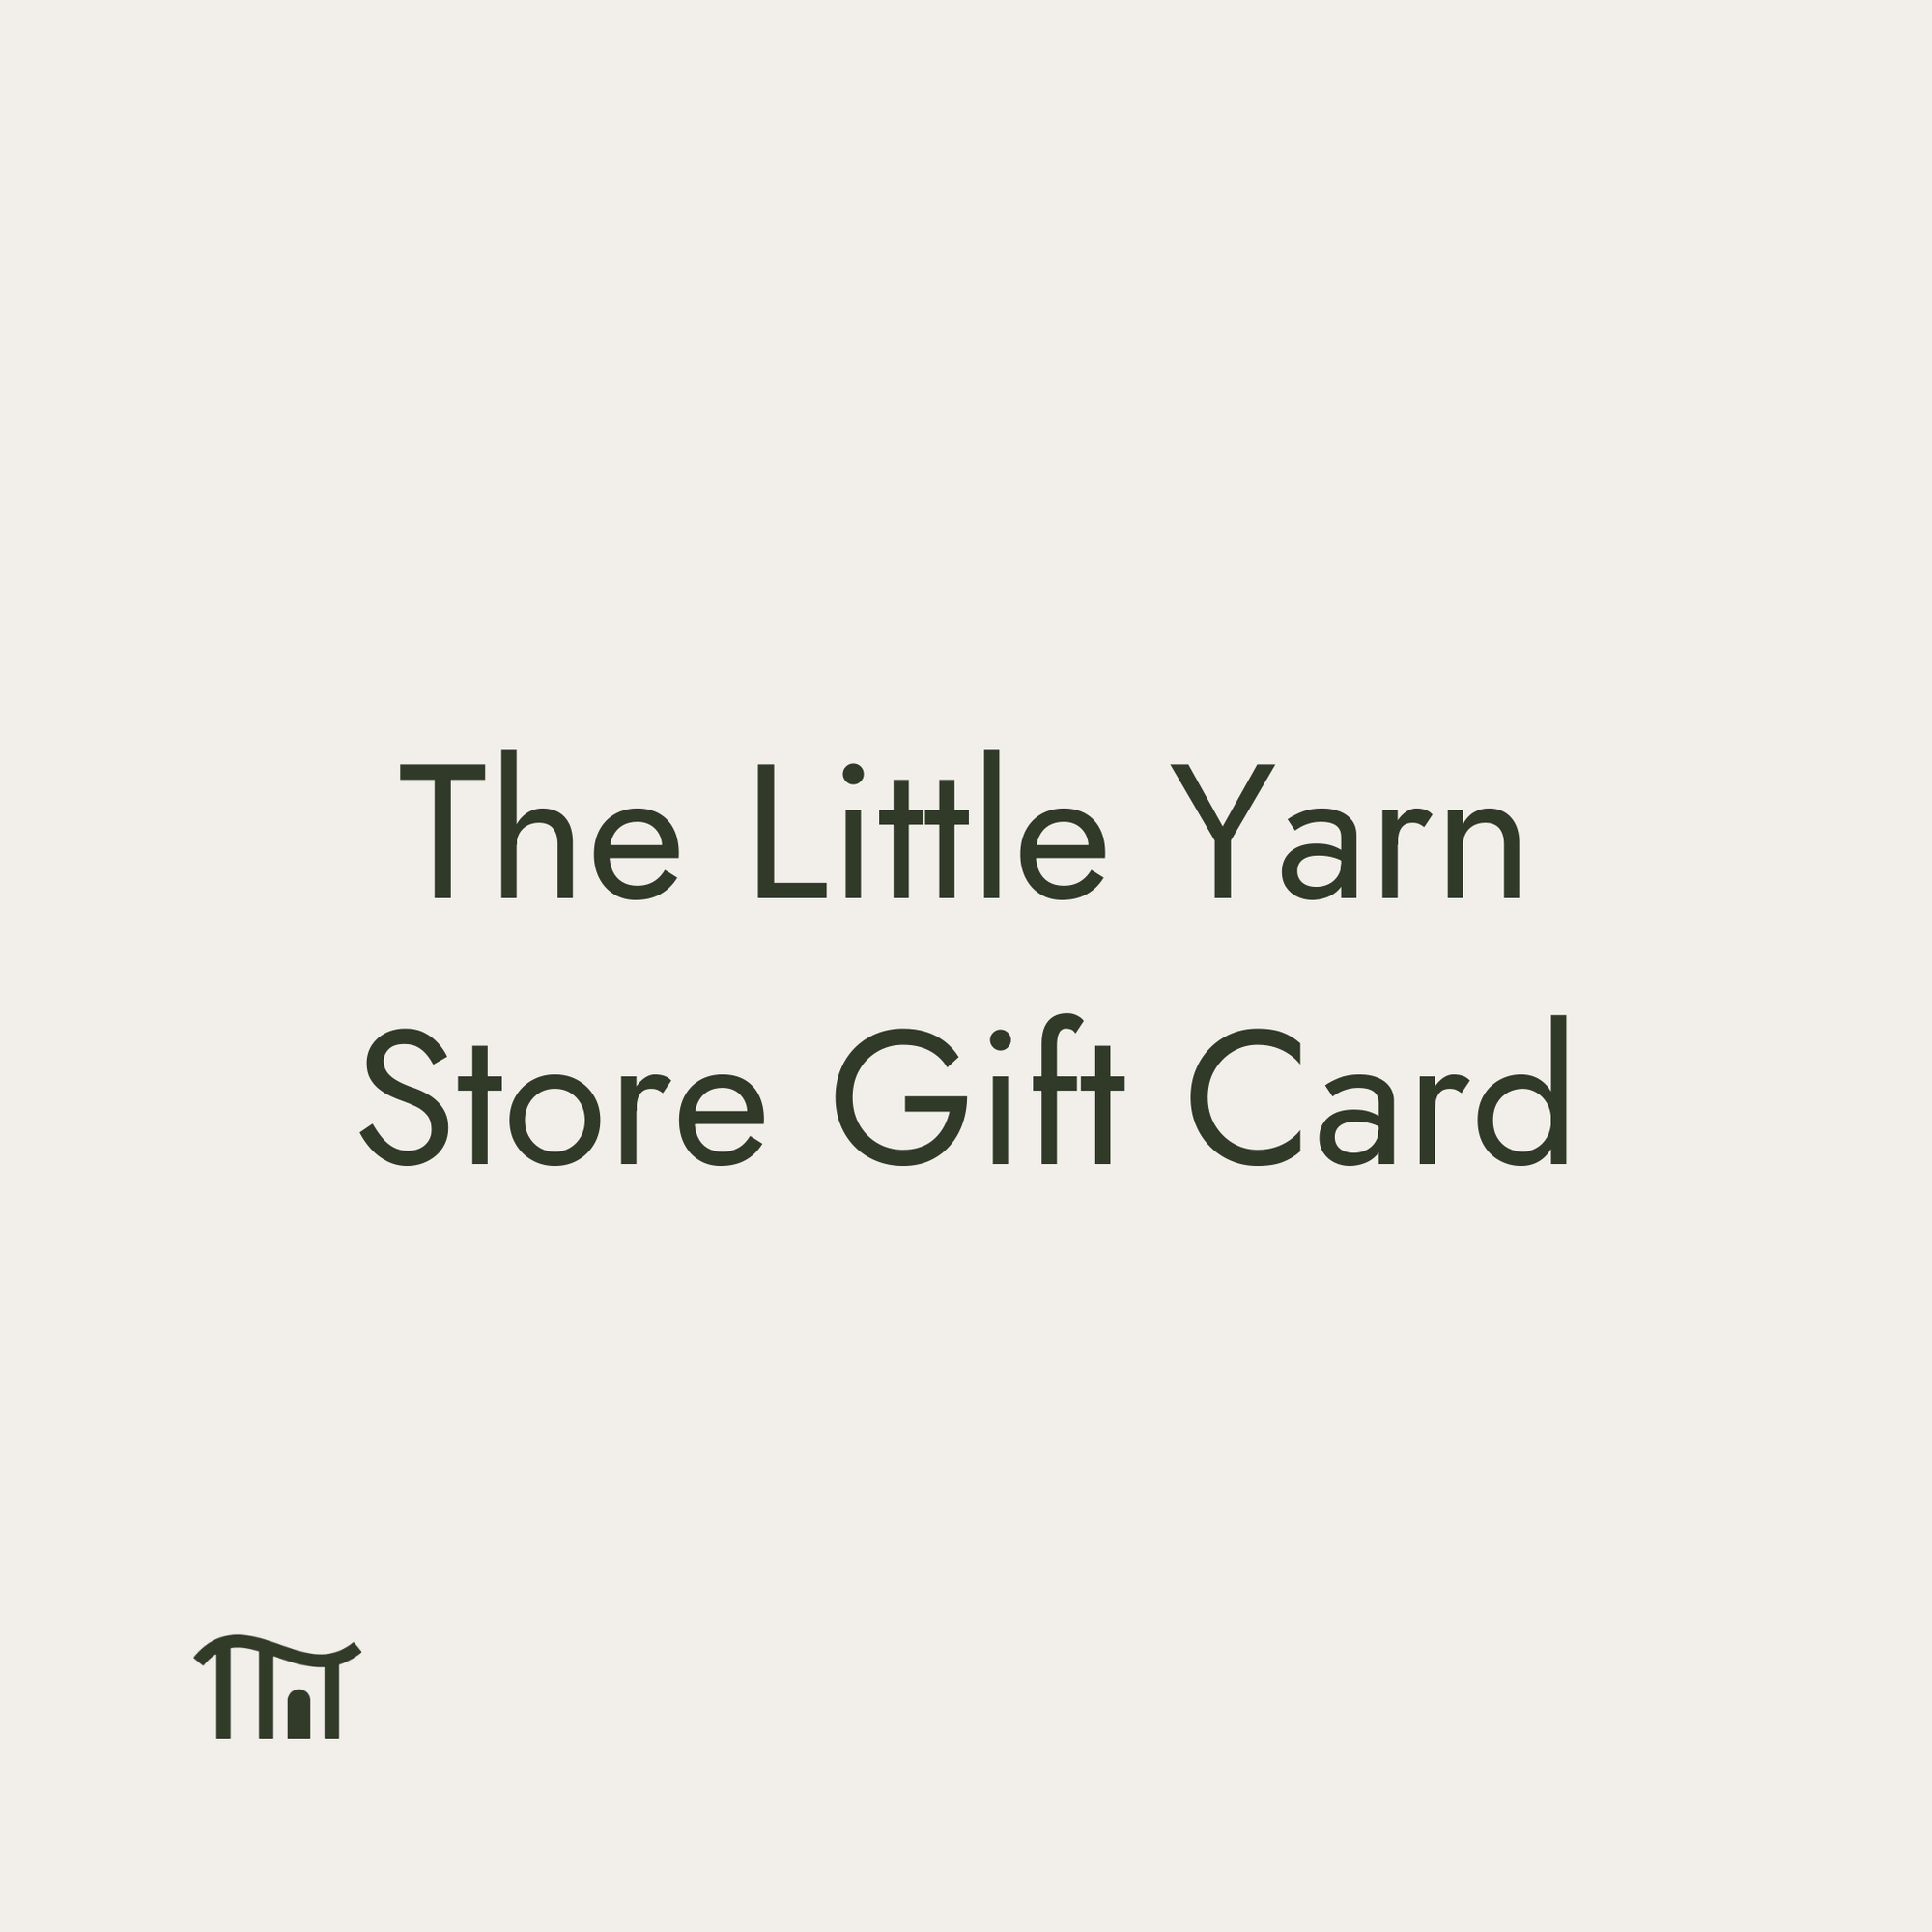 Gift Card - $25.00 - Gift Guide - The Little Yarn Store - The Little Yarn Store